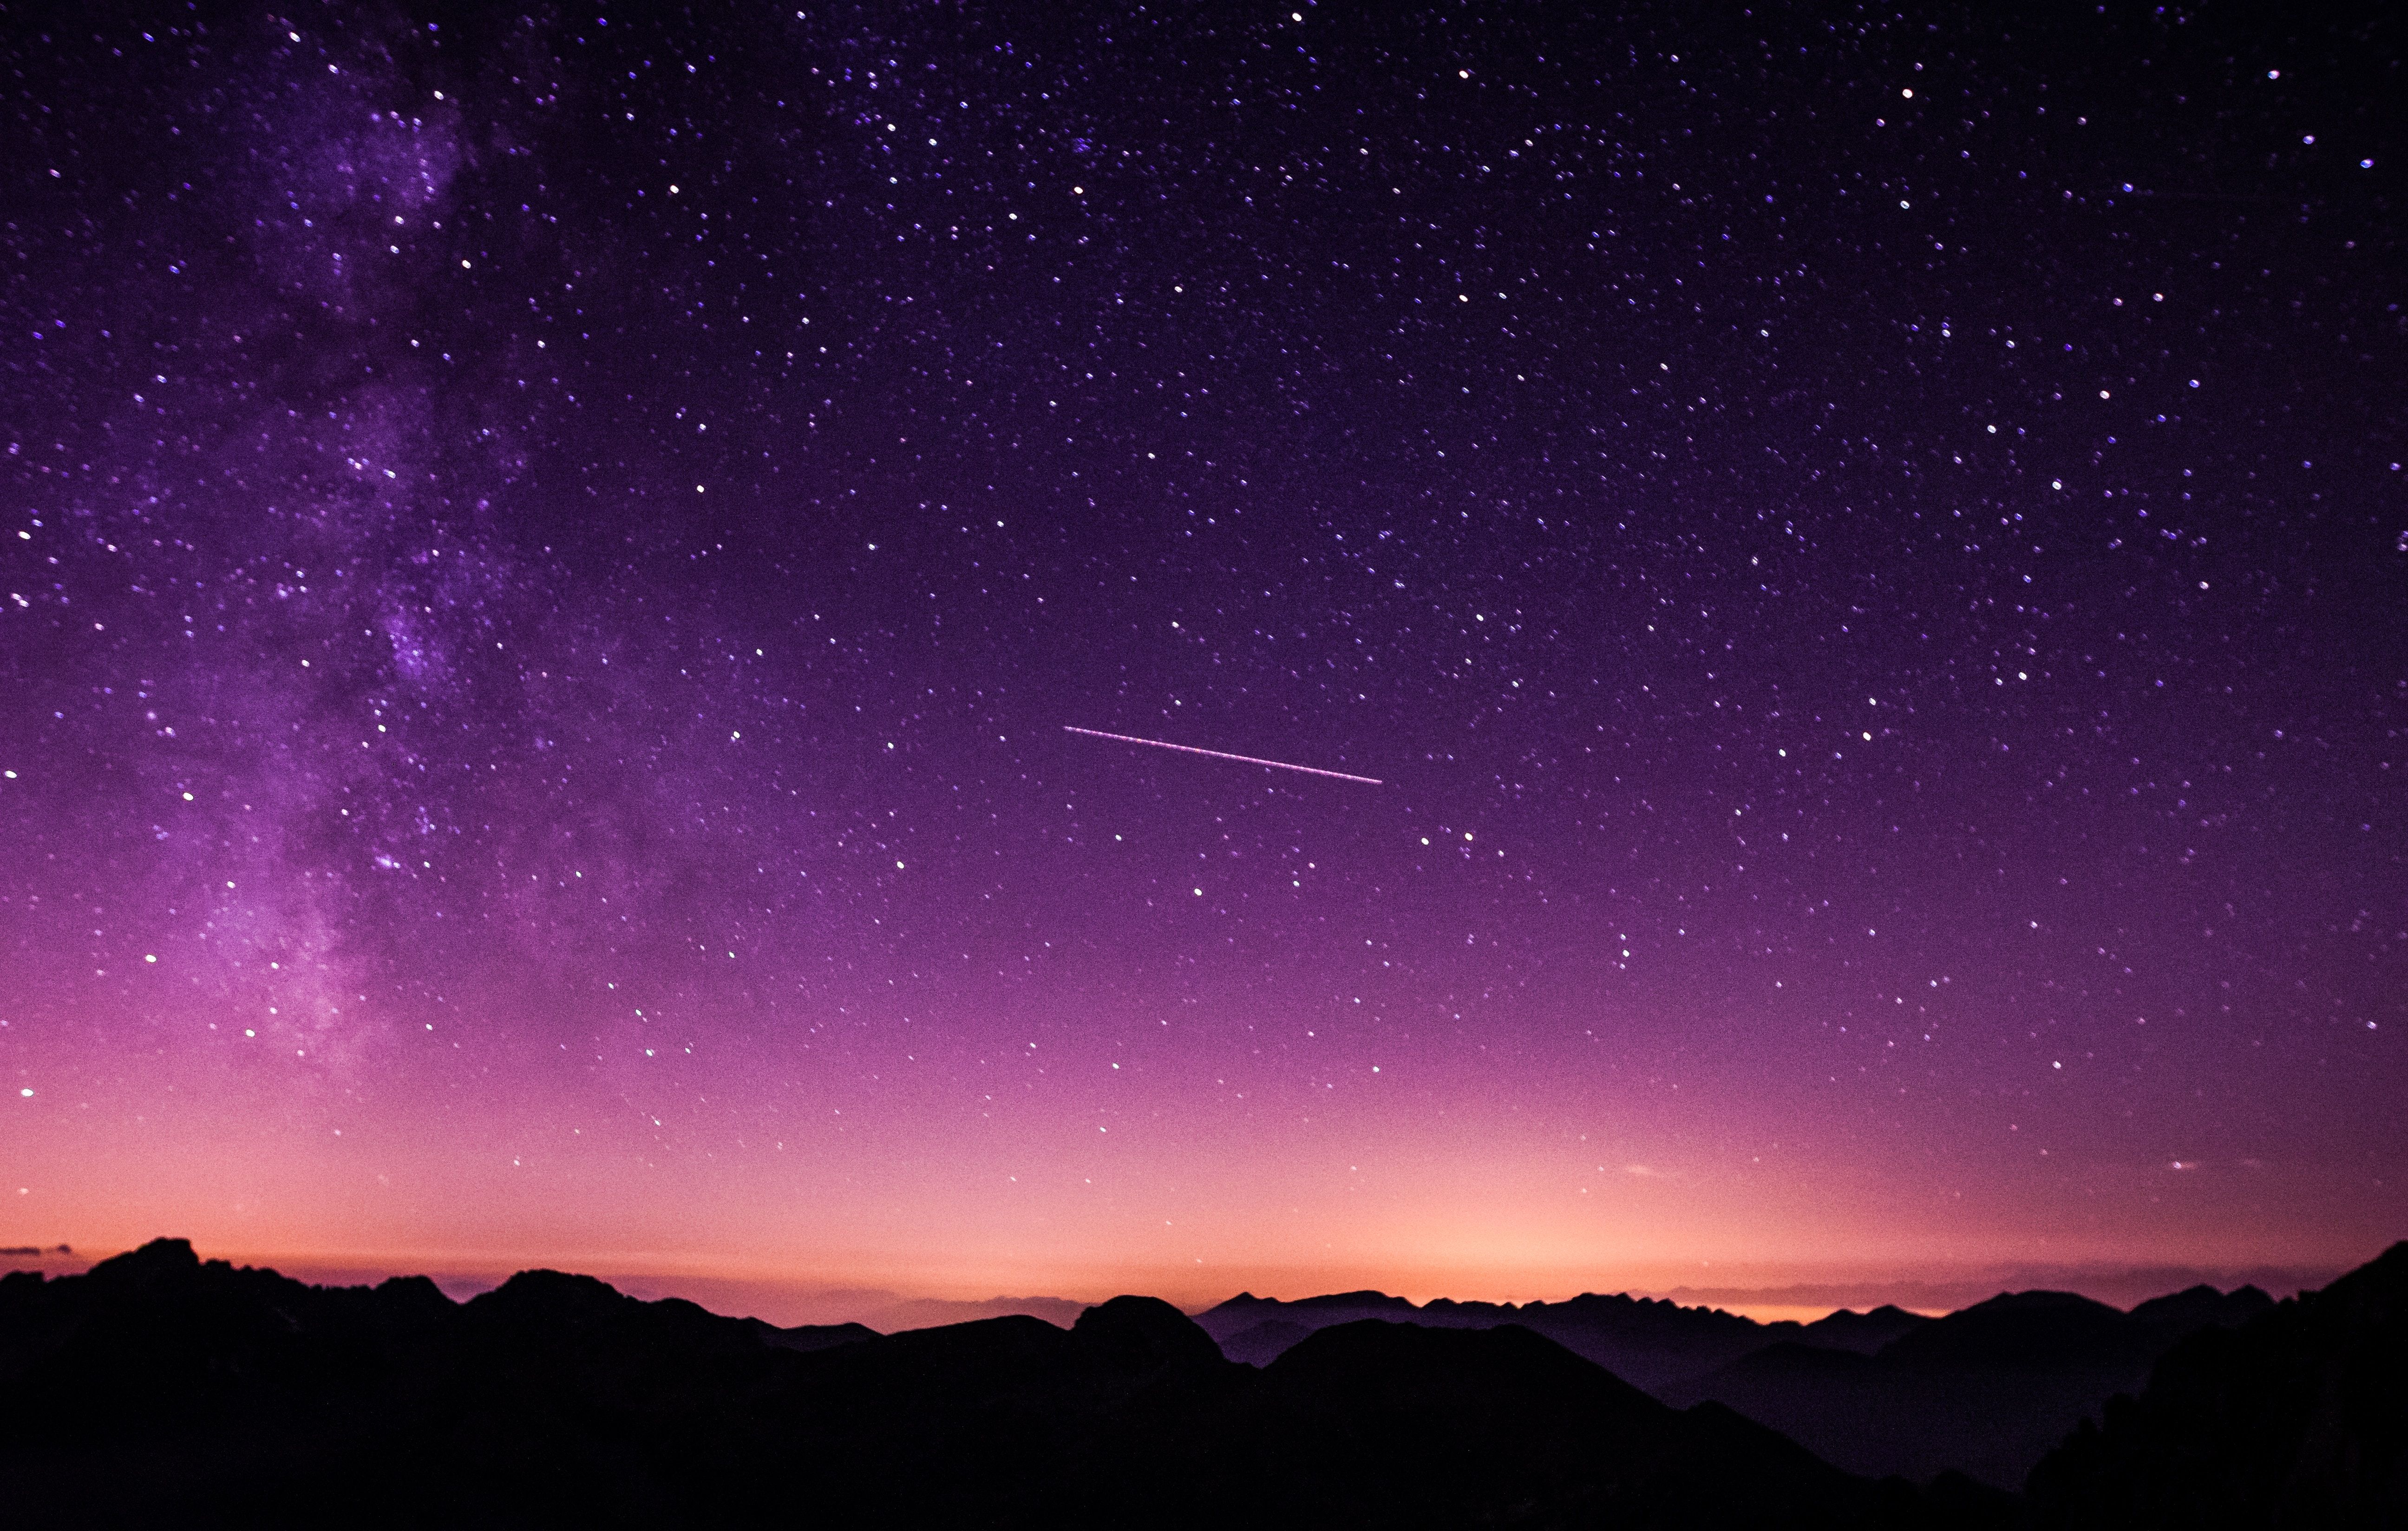 Aesthetic Space HD Wallpaper Free download